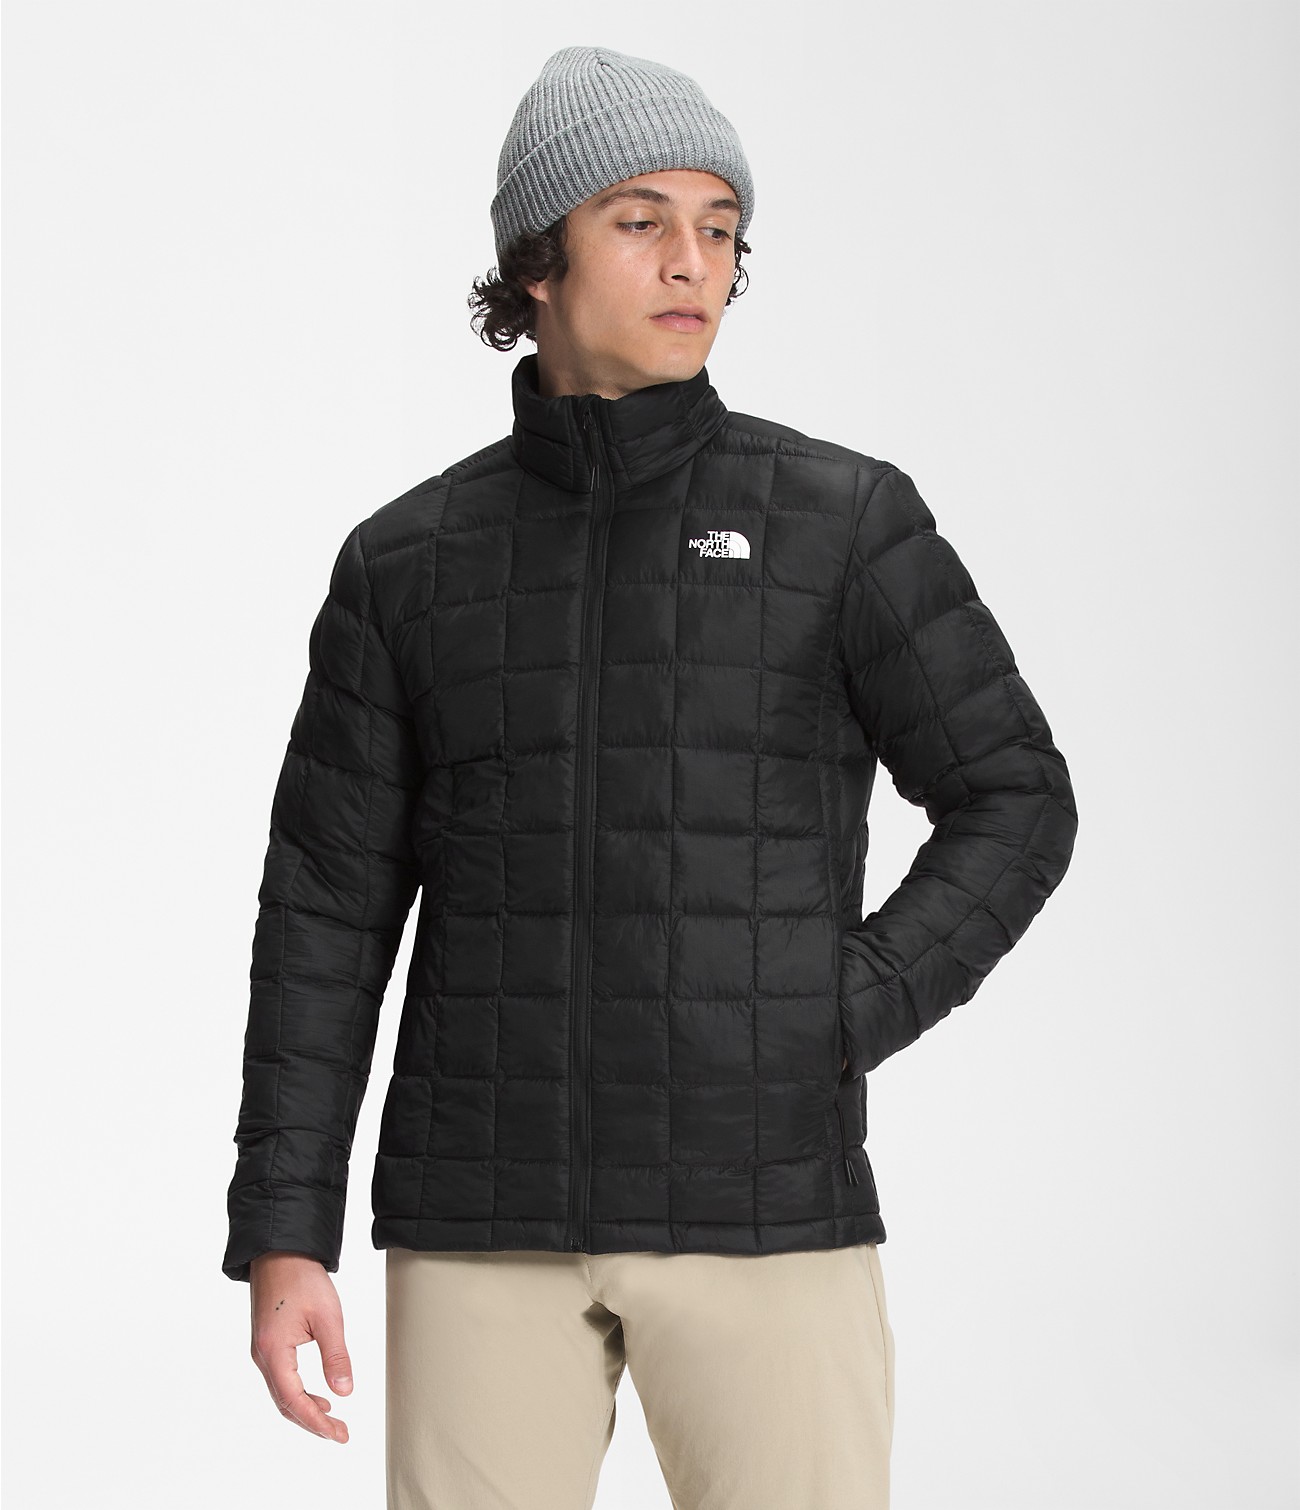 Unlock Wilderness' choice in the Kathmandu Vs North Face comparison, the ThermoBall™ Eco Jacket 2.0 by The North Face